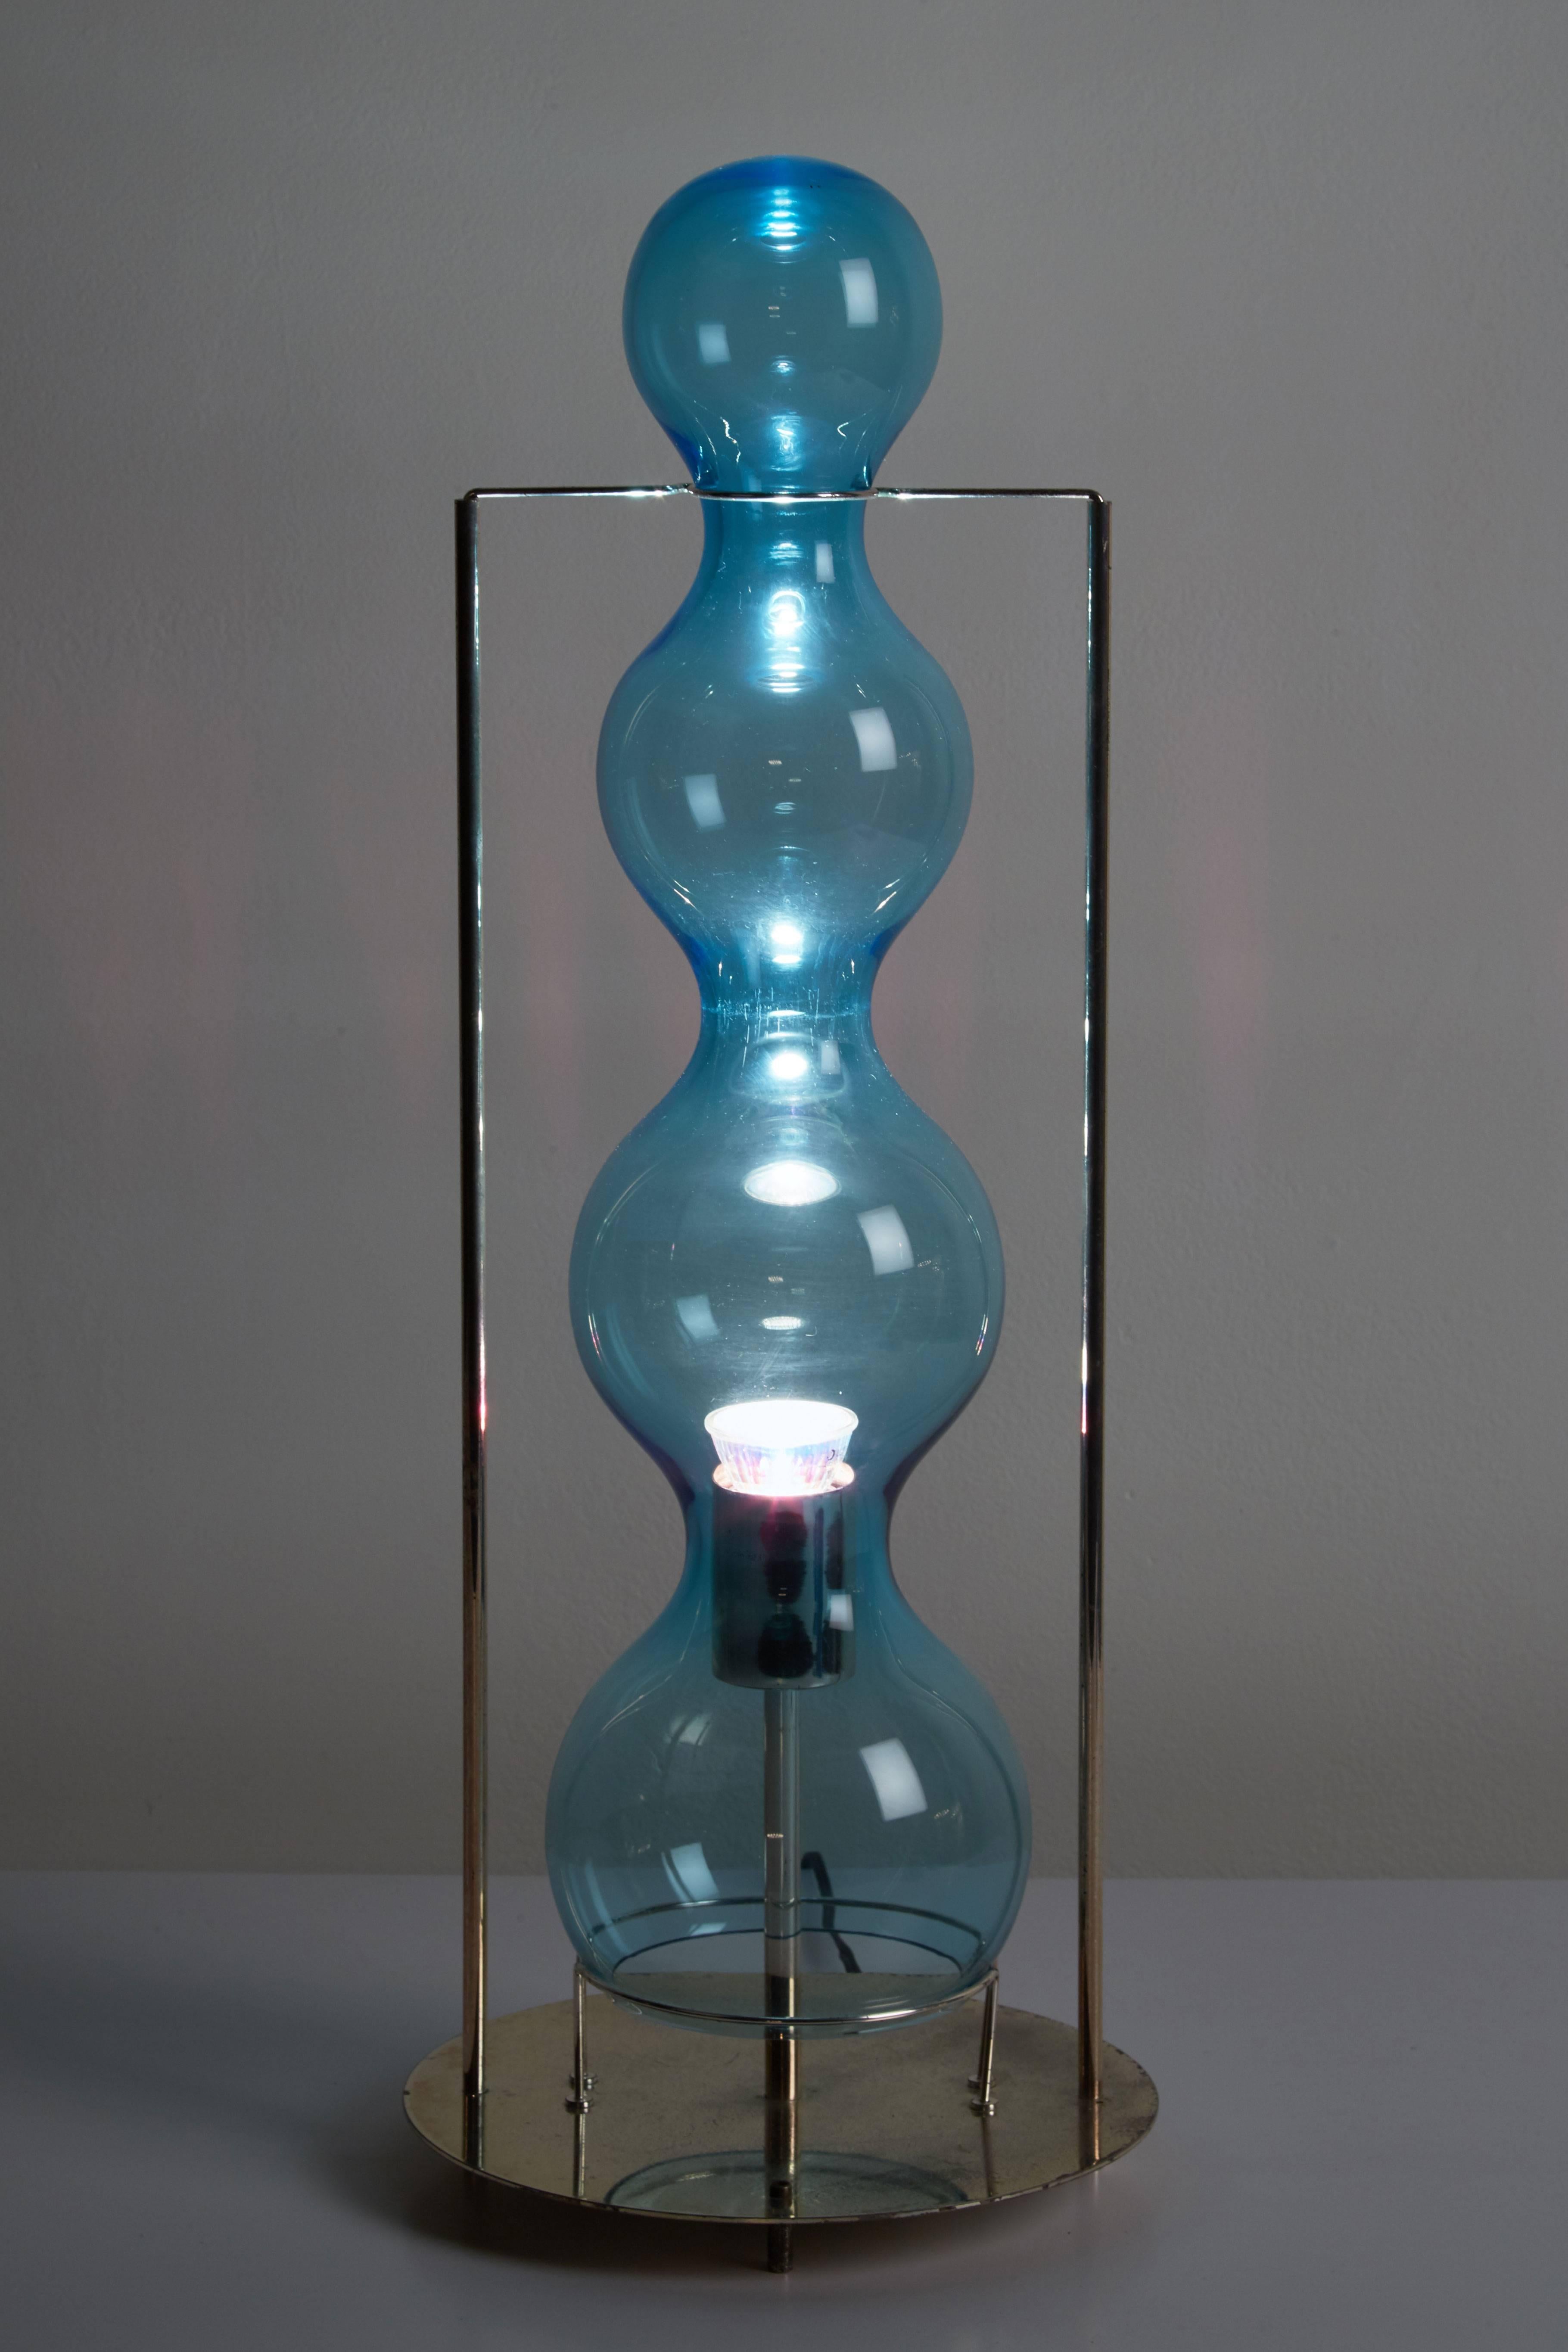 Rare blown glass table lamp by Jeannot Ceruttifor VeArt designed in Italy, 1986  Steel base. VeArt Scorzè, near Venice, Italy was a glass factory founded in 1965 by Ludovico de Santillana and Sergio Biliotti from Venini & Co, which is the most